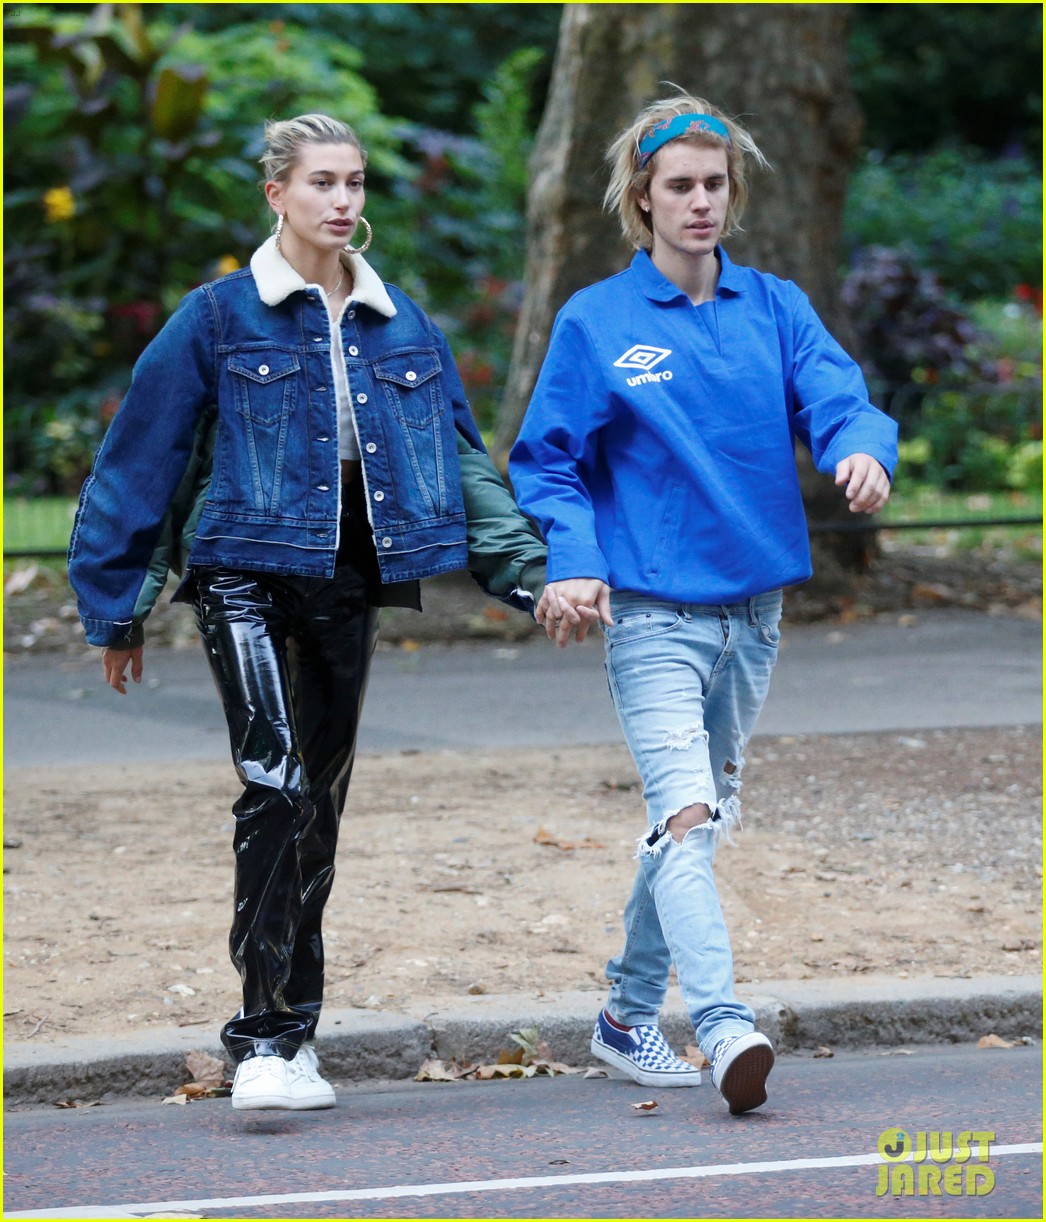 Justin Bieber & Hailey Baldwin Pack on the PDA in London: Photo 4148204 |  Hailey Baldwin, Justin Bieber Pictures | Just Jared